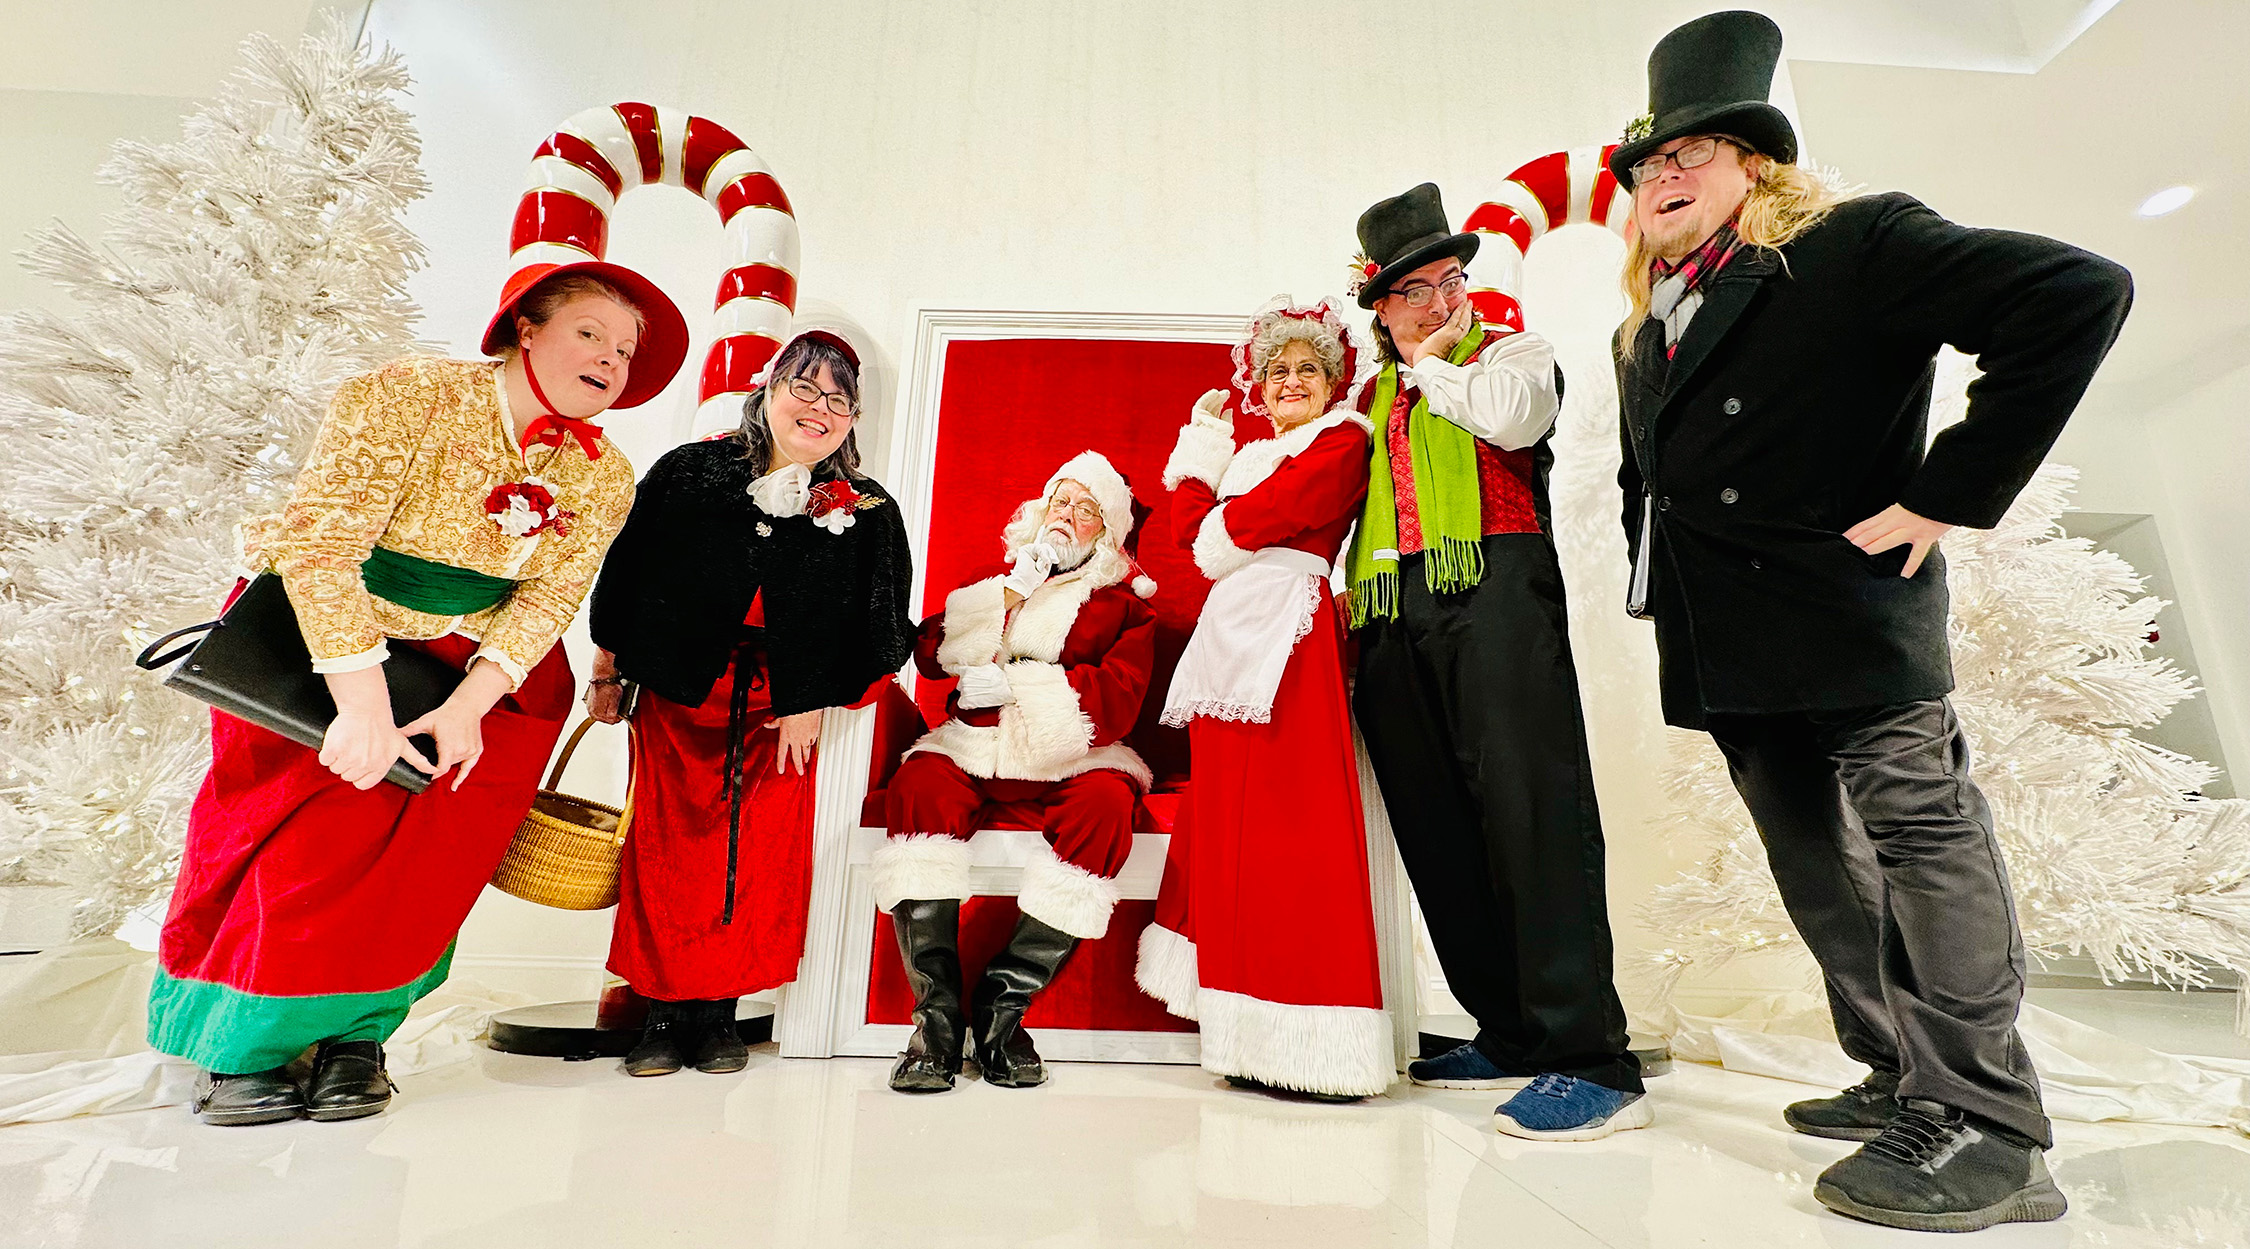 Fun with Santa, Mrs. Claus and the carolers